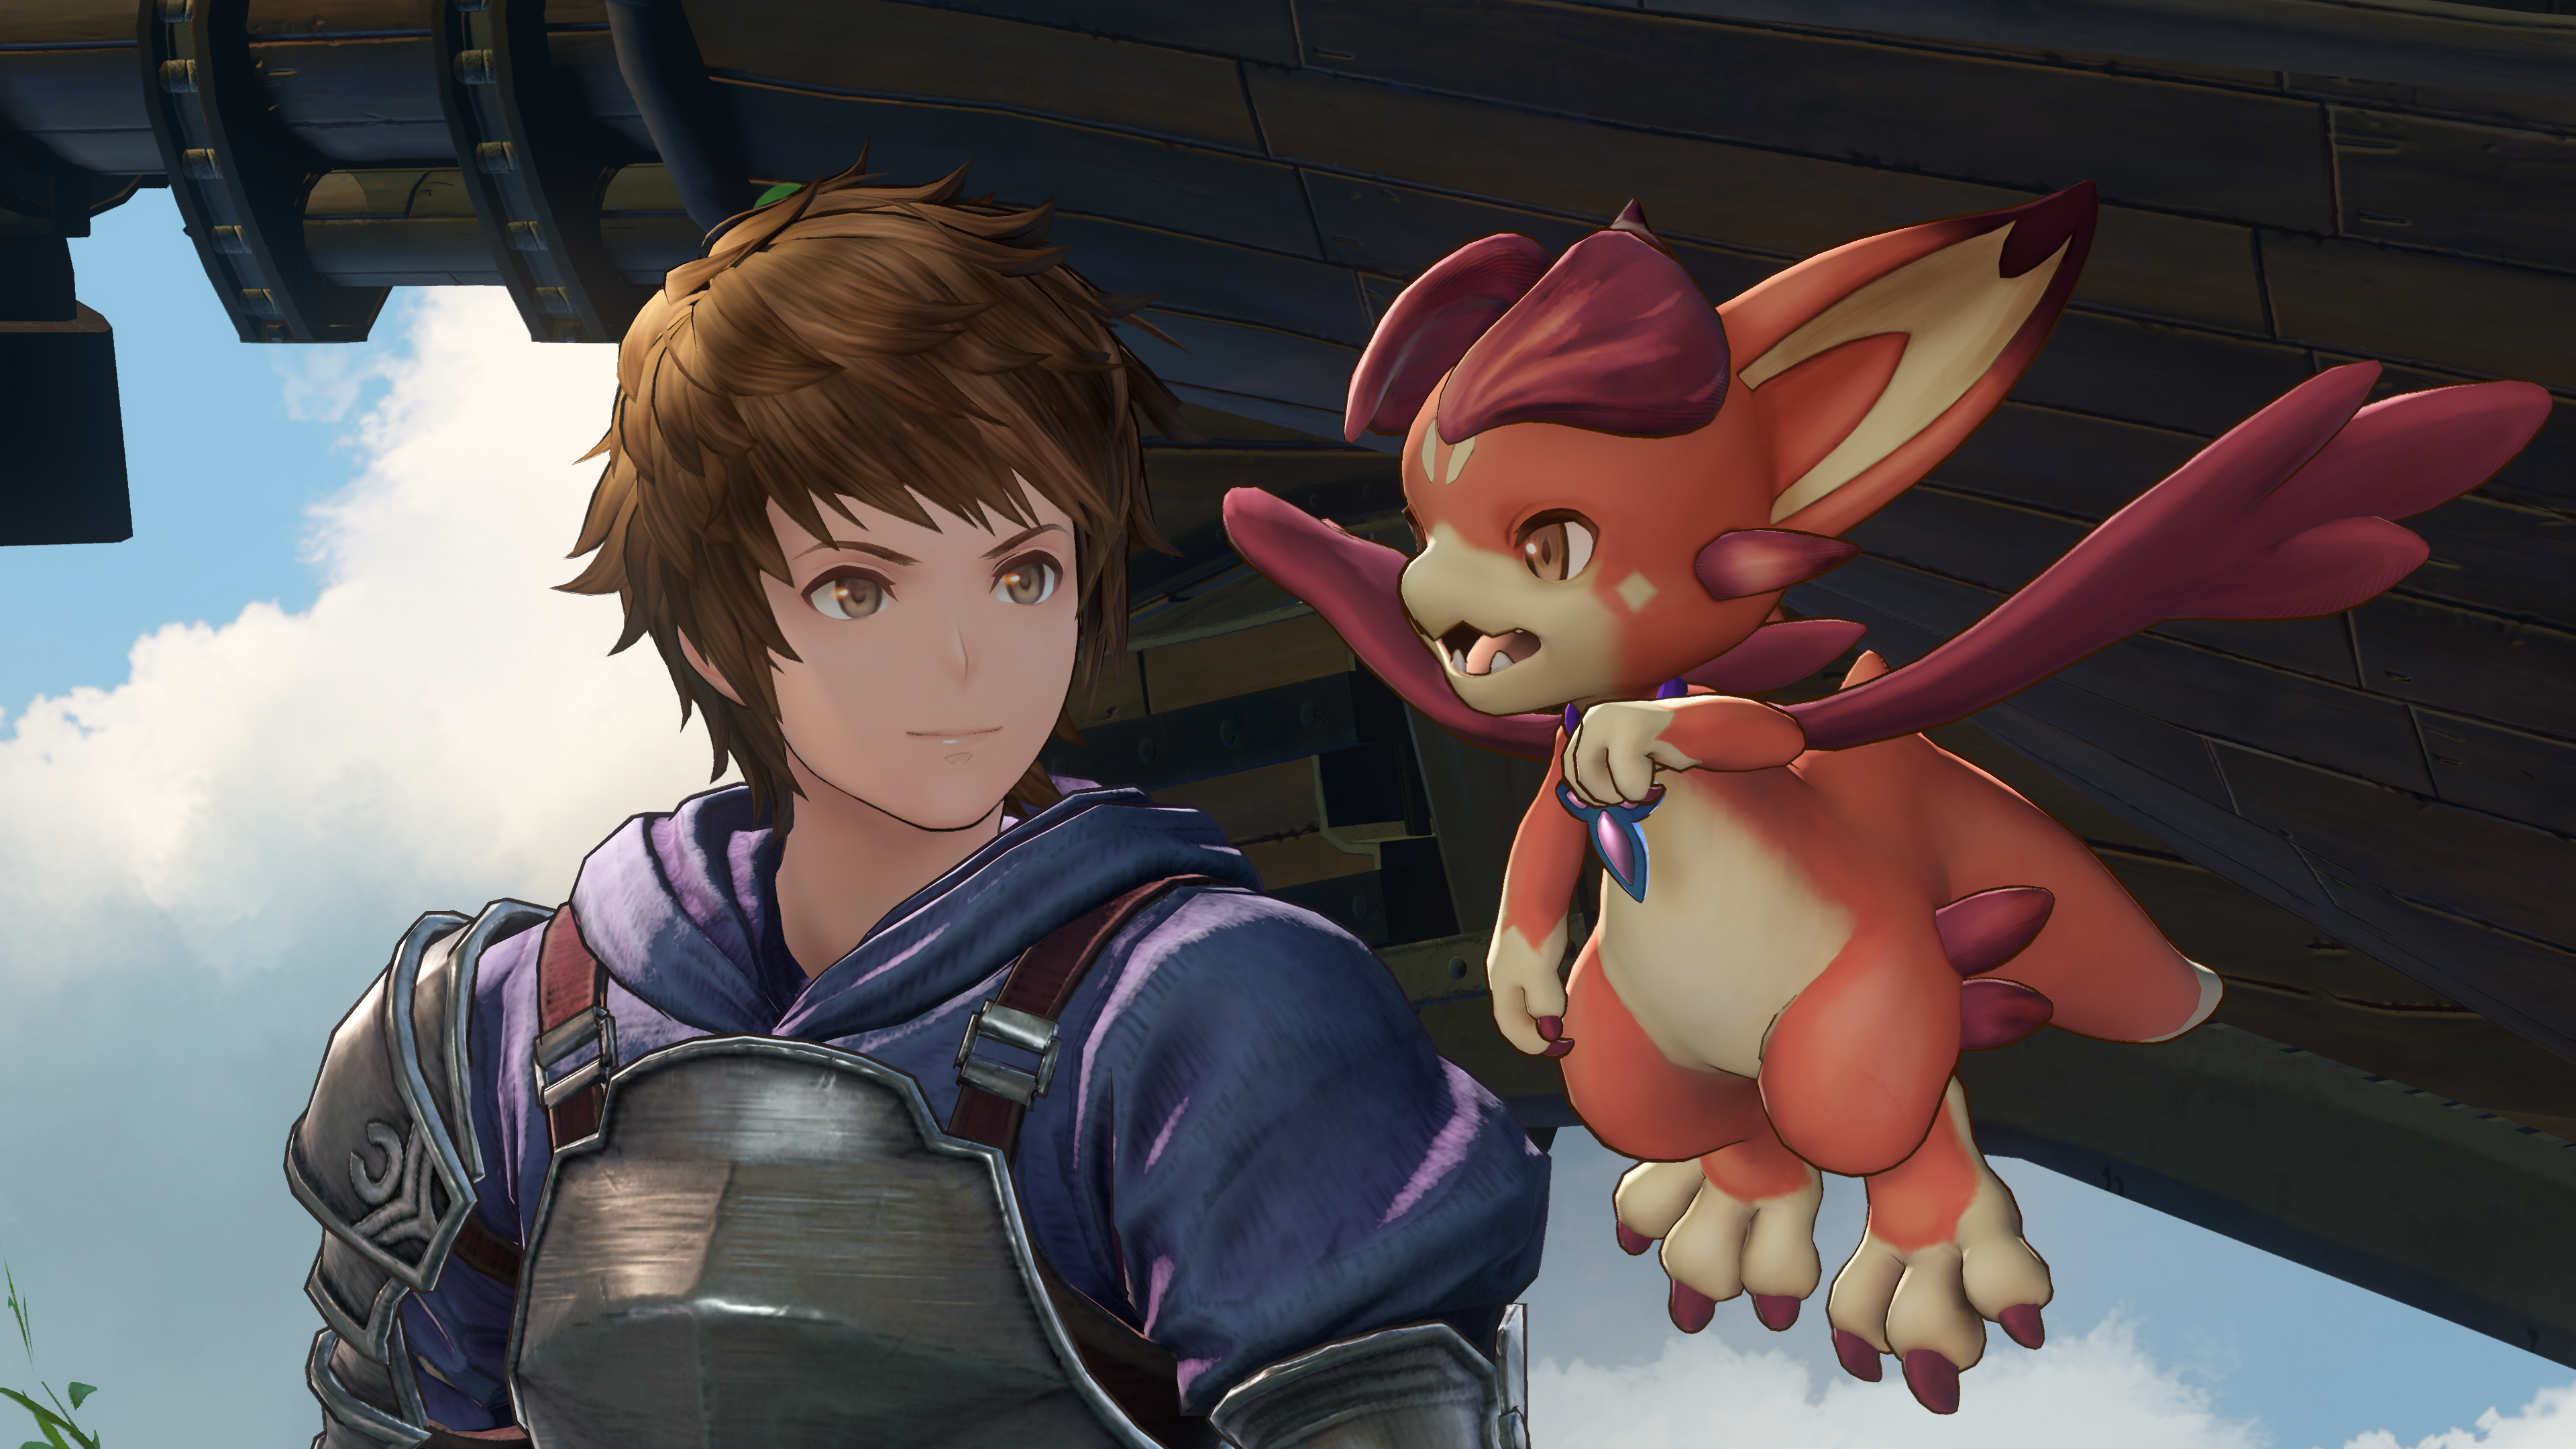 Granblue Fantasy: Relink PS5 and PS4 demo launches in January 2024;  playable characters Cagliostro, Seofon, and Tweyen announced : r/PS5